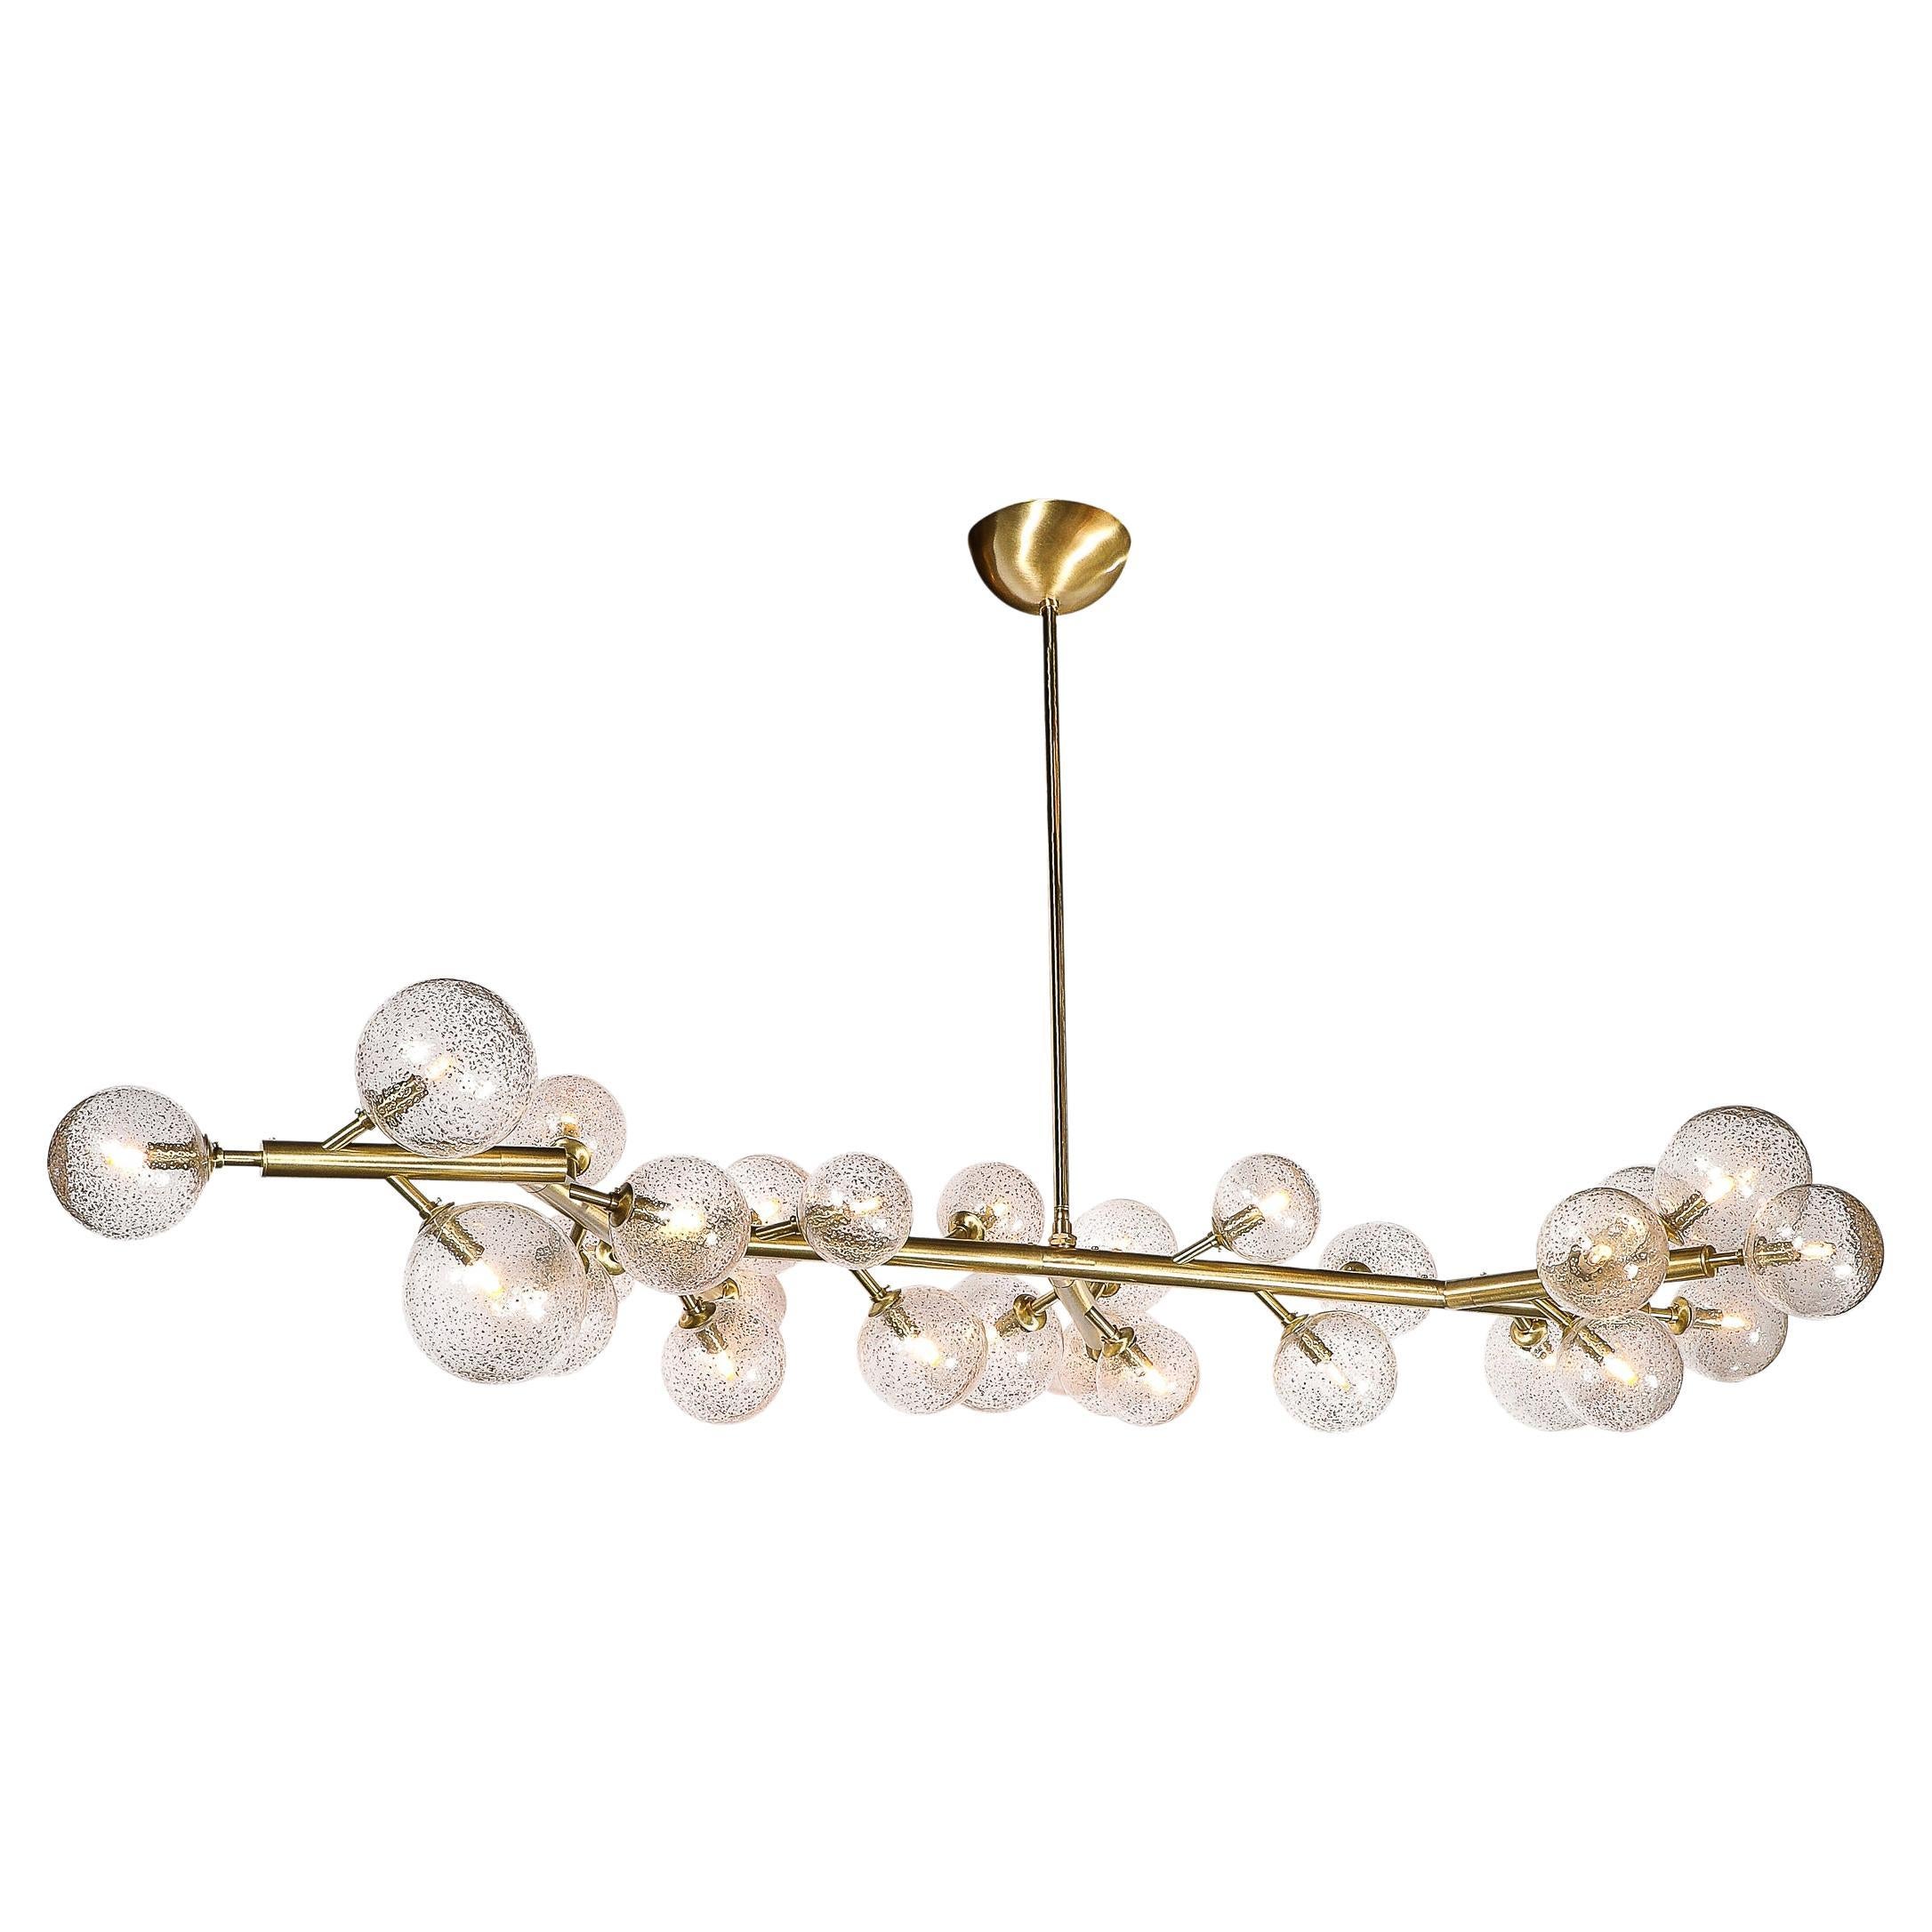 Custom Branch Form Hand-blown Murano Glass w/ 24k Gold & Brass Fitted Chandelier For Sale